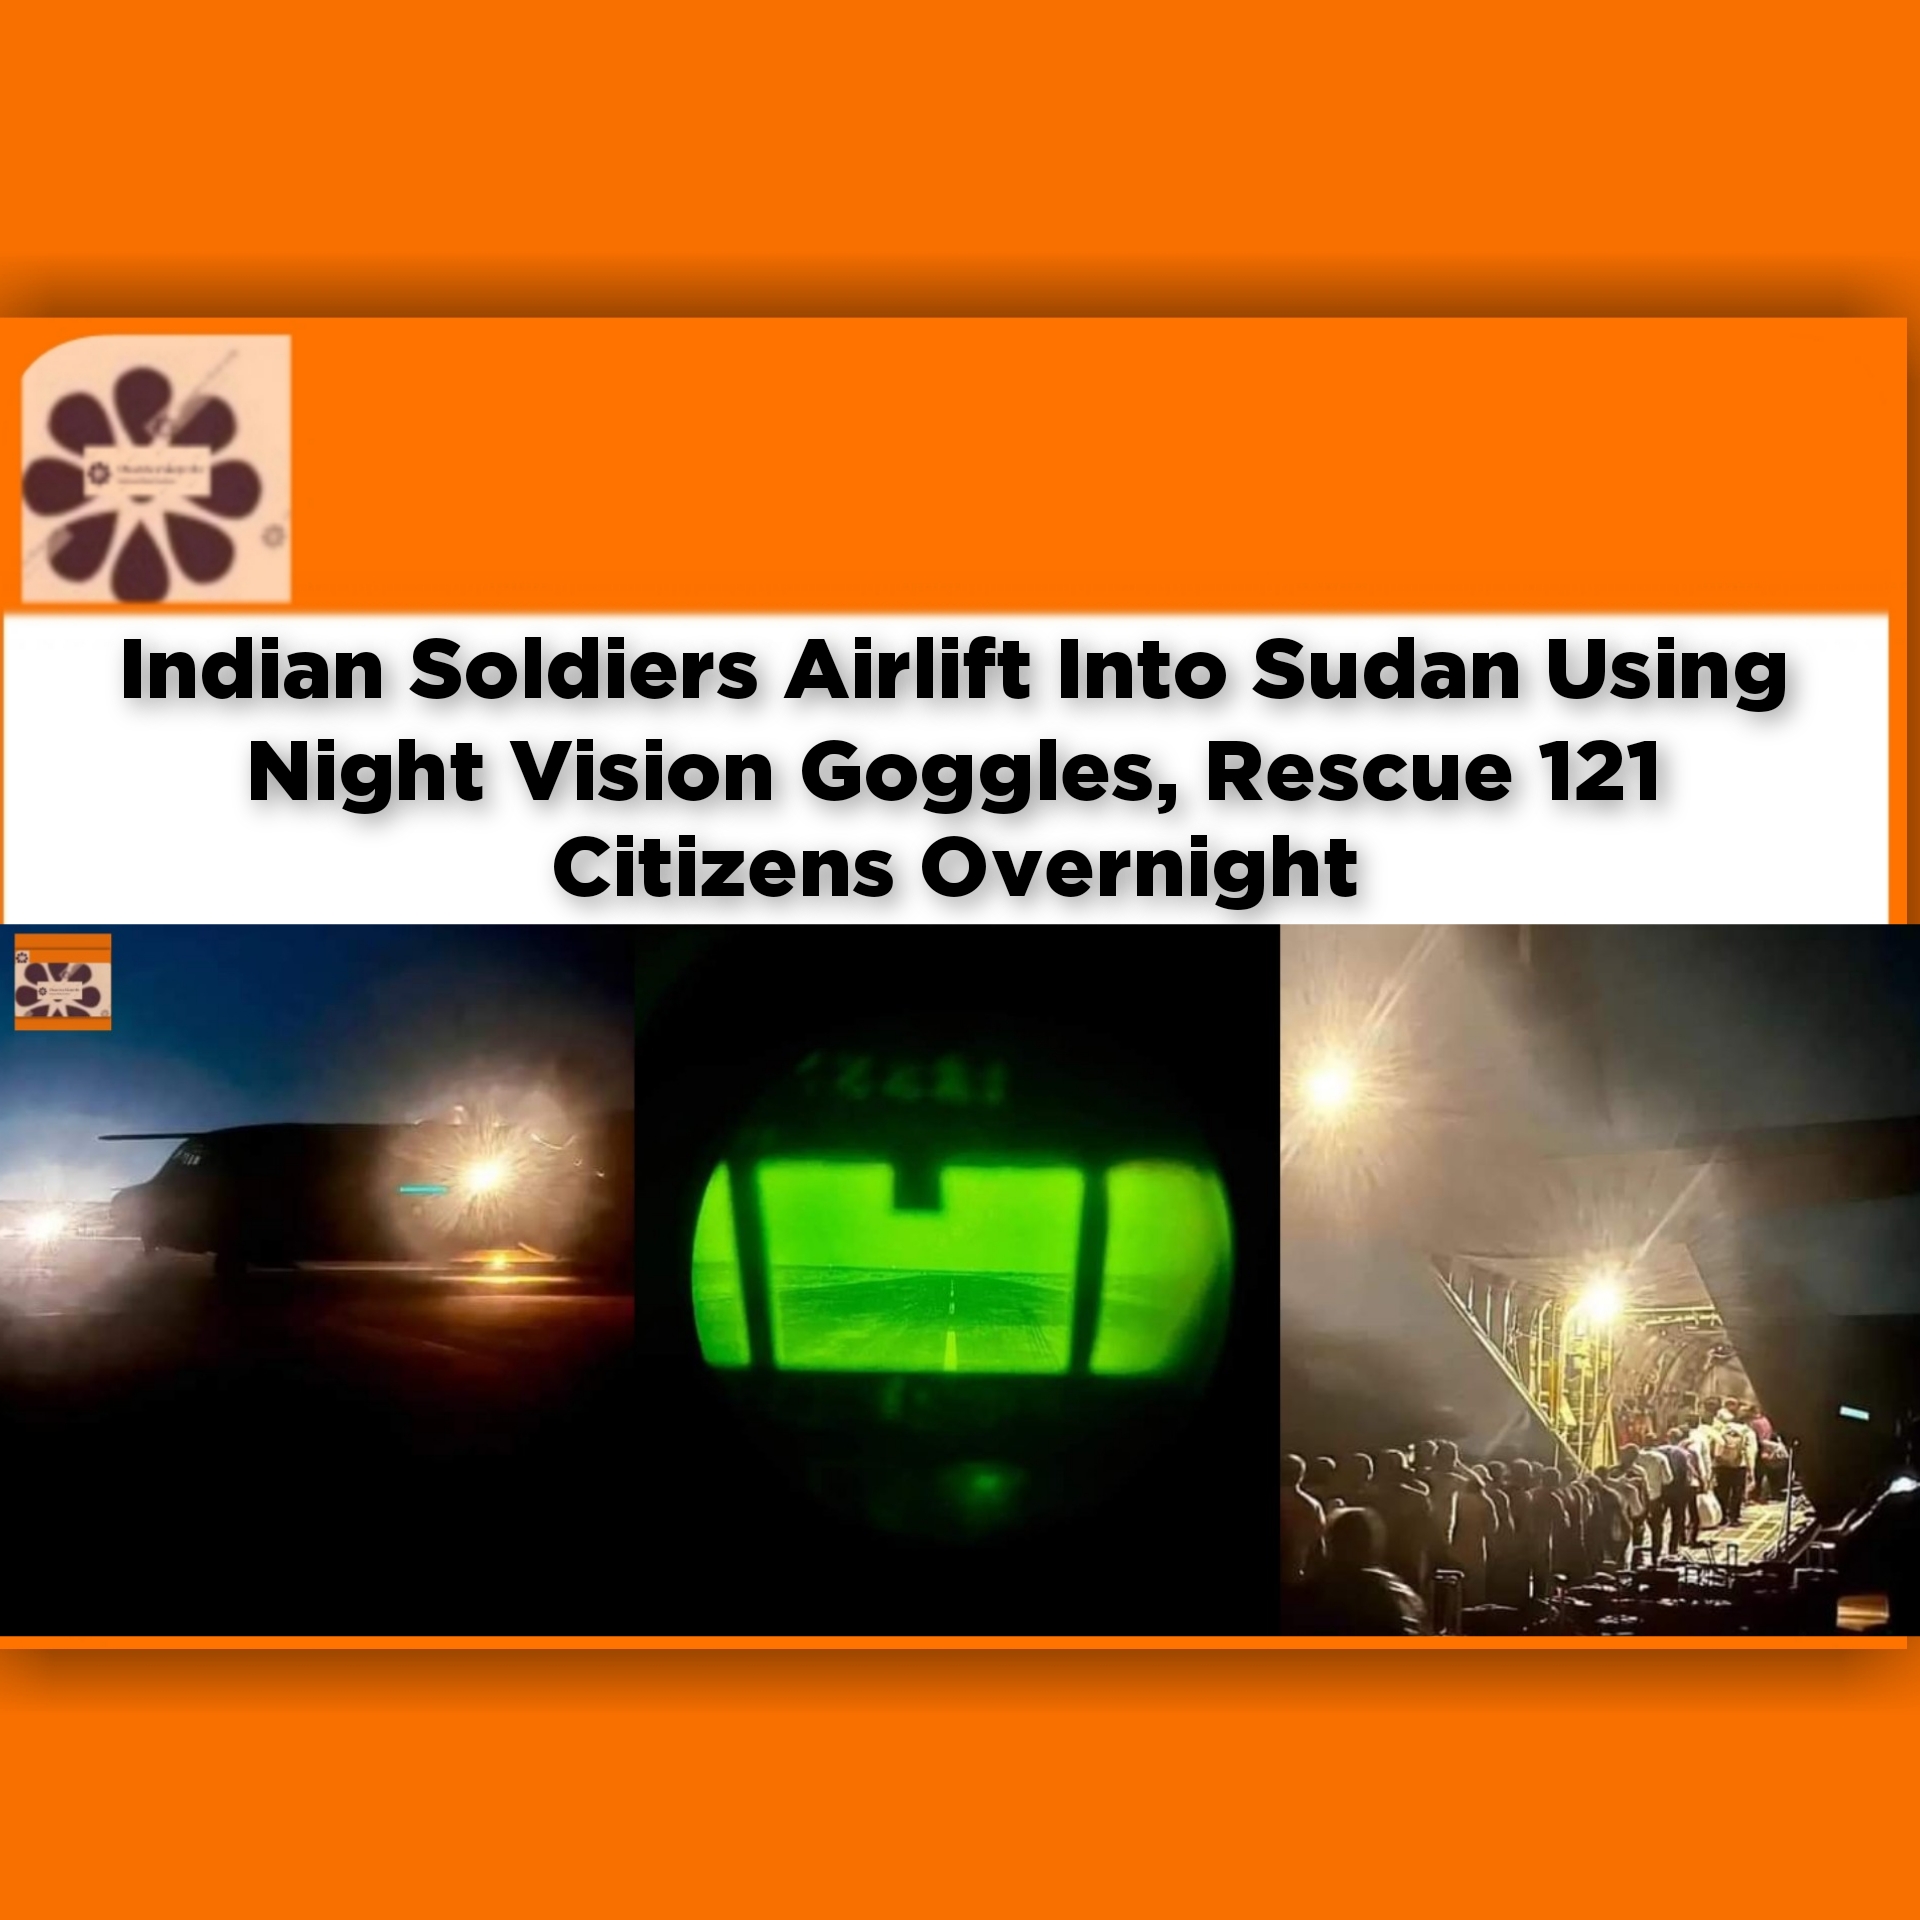 Indian Soldiers Airlift Into Sudan Using Night Vision Goggles, Rescue 121 Citizens Overnight ~ OsazuwaAkonedo #airlift #breaking #citizens #goggles, #India #Khartoum #military #overnight #Plane #security #soldiers #Sudan #war